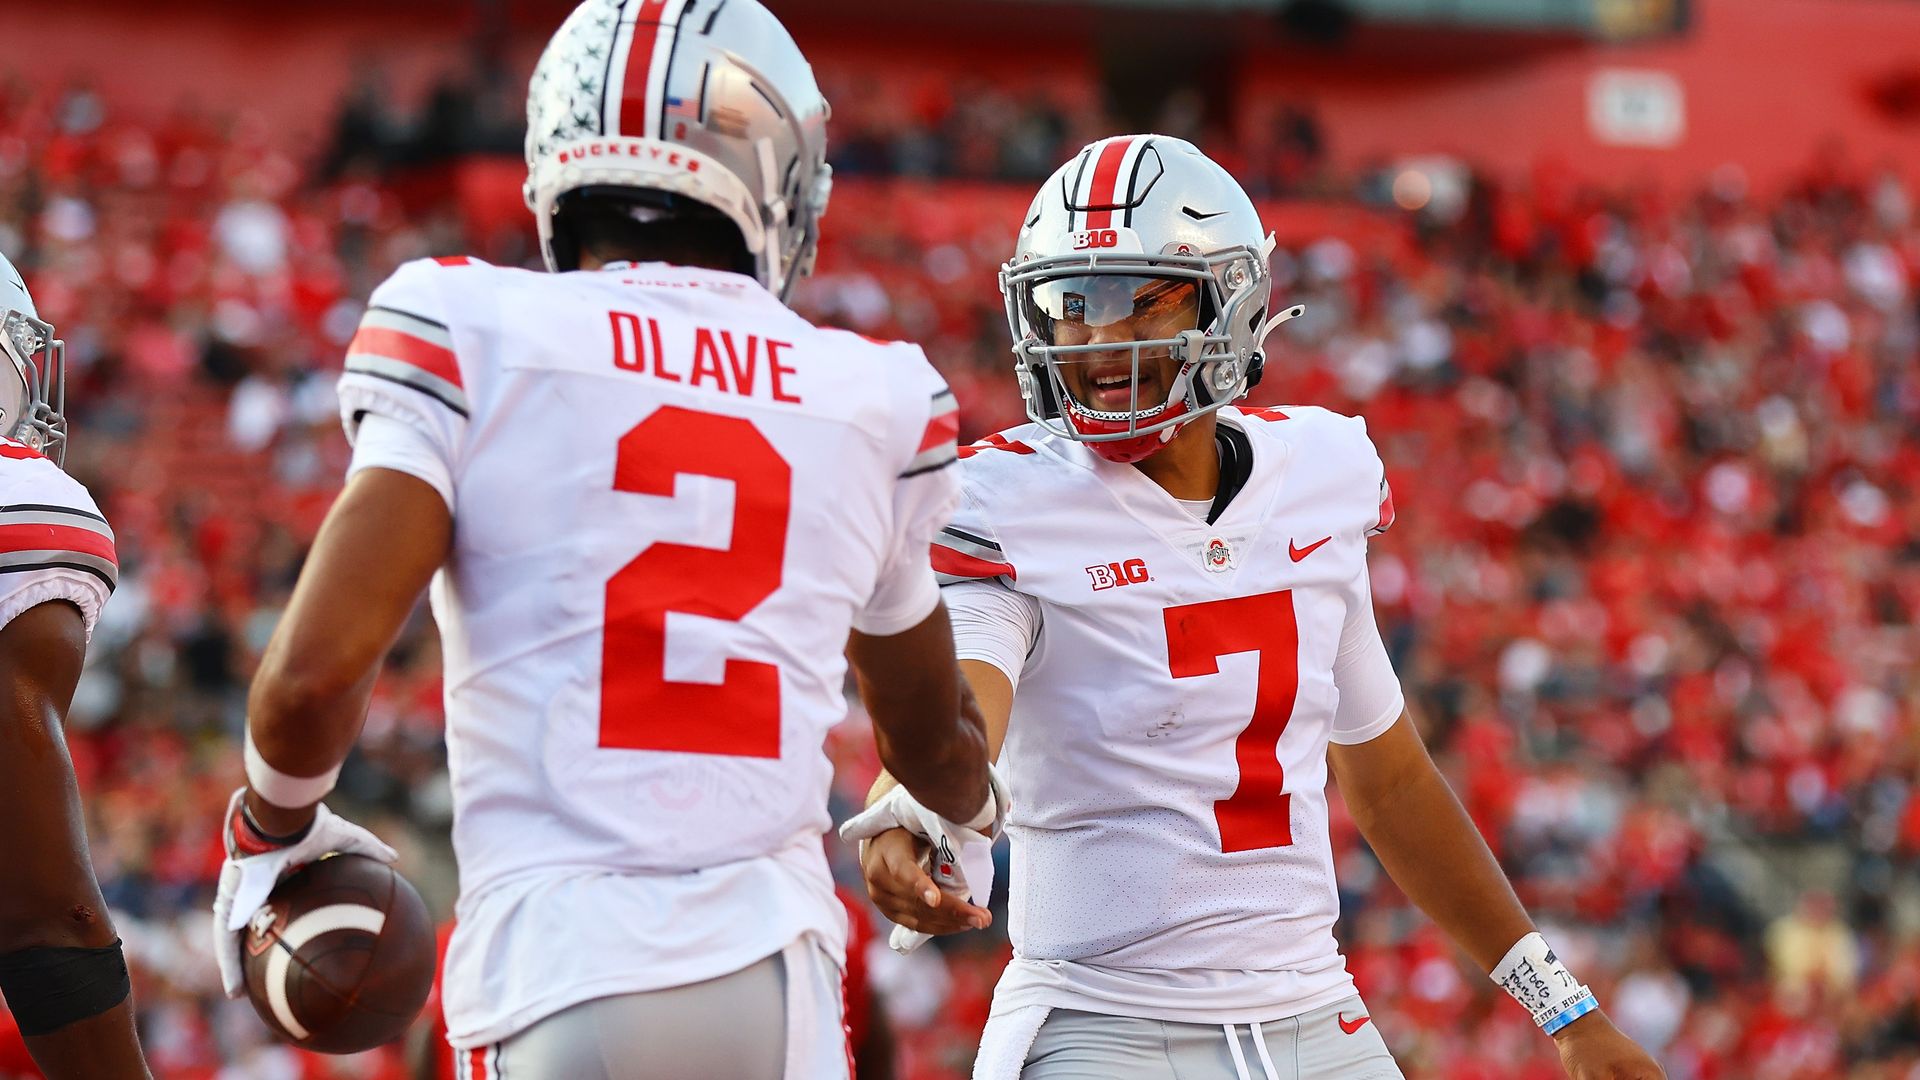 Two Ohio State players shake hands in celebration after scoring a touchdown. 